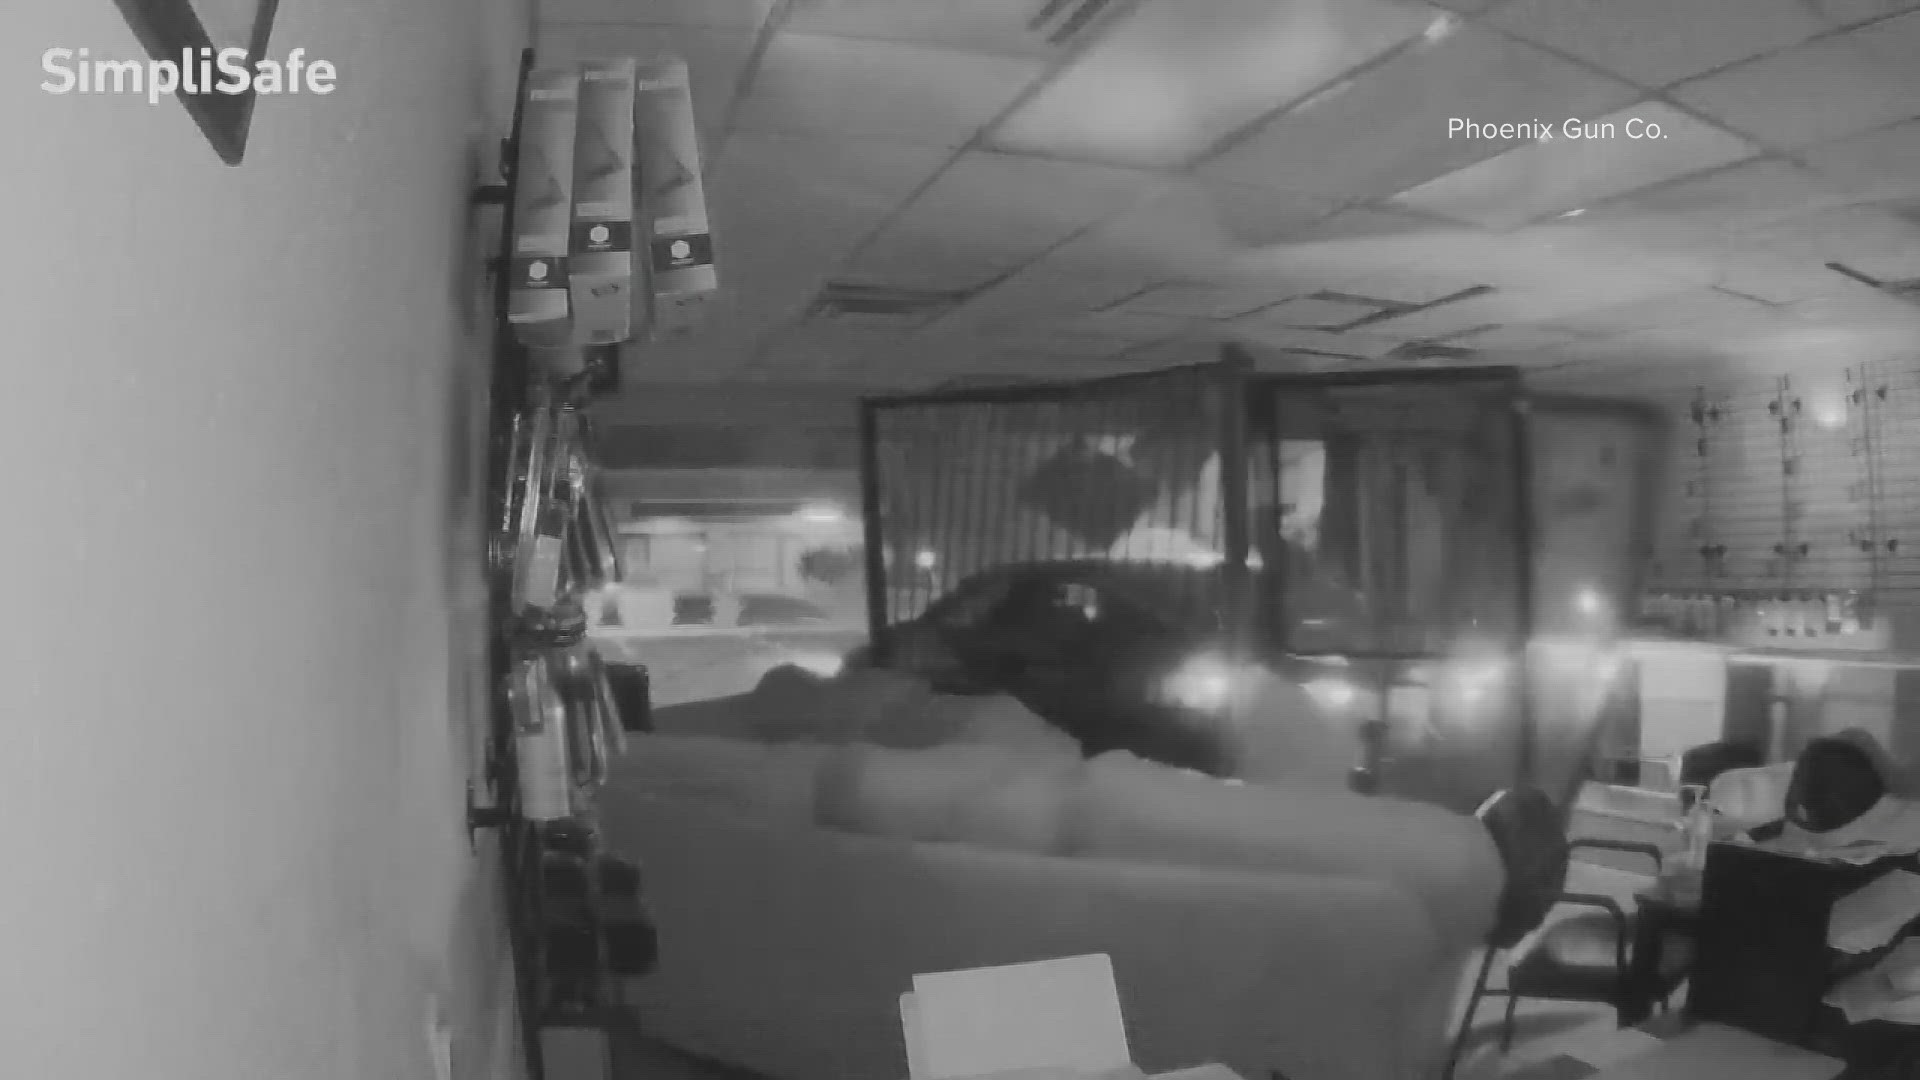 A group of burglars smashed a car into a Phoenix firearm store Saturday morning and stole about $1,000 in merchandise. But they didn't walk out with any guns.